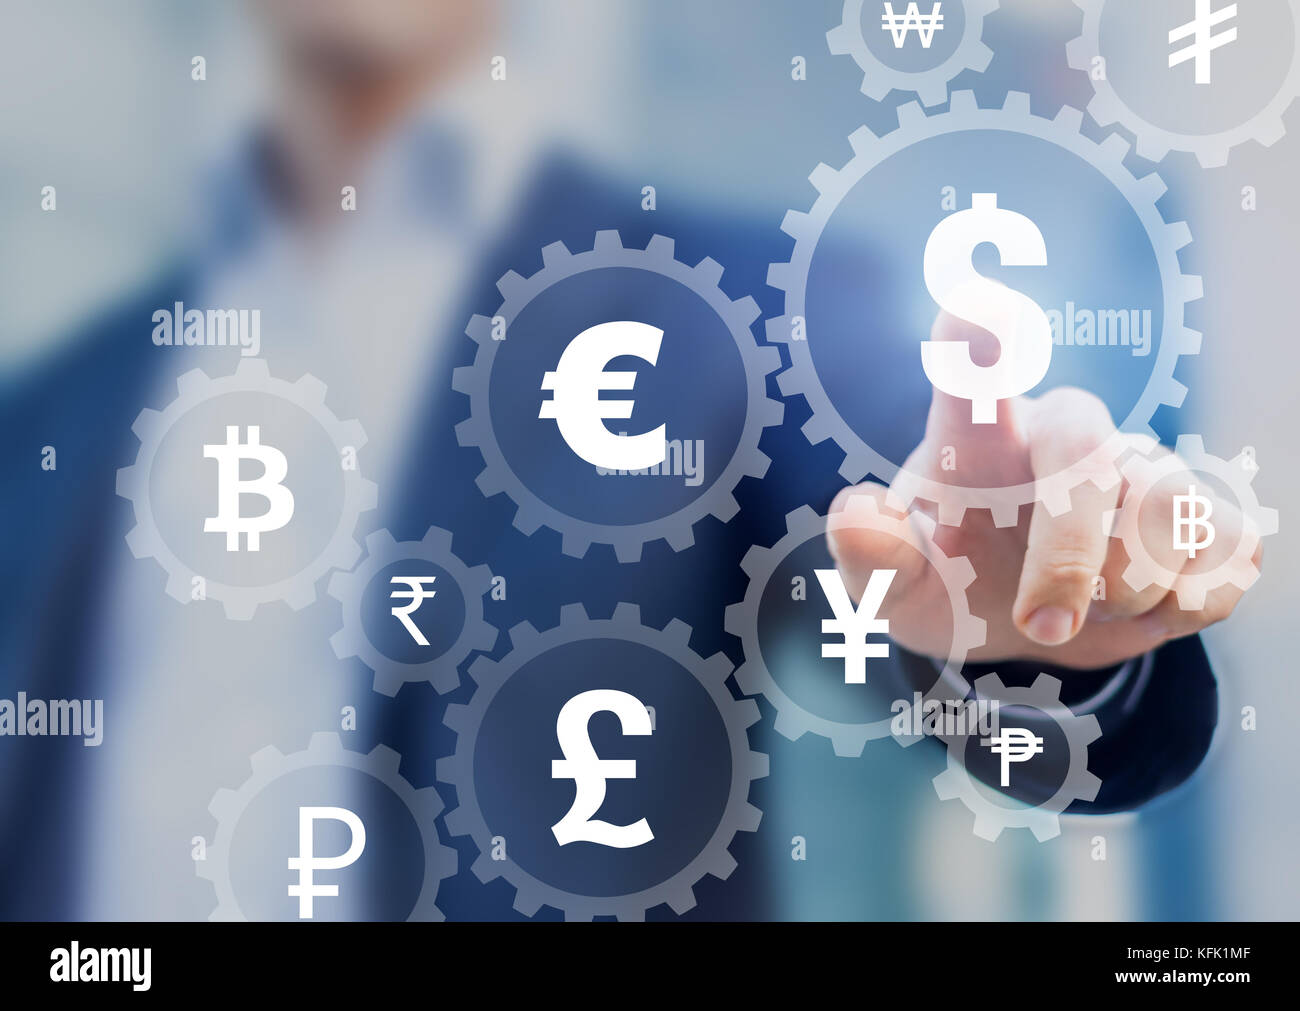 Foreign exchange trading concept with currency symbols inside connected gears to show connection between money, businessman in background Stock Photo